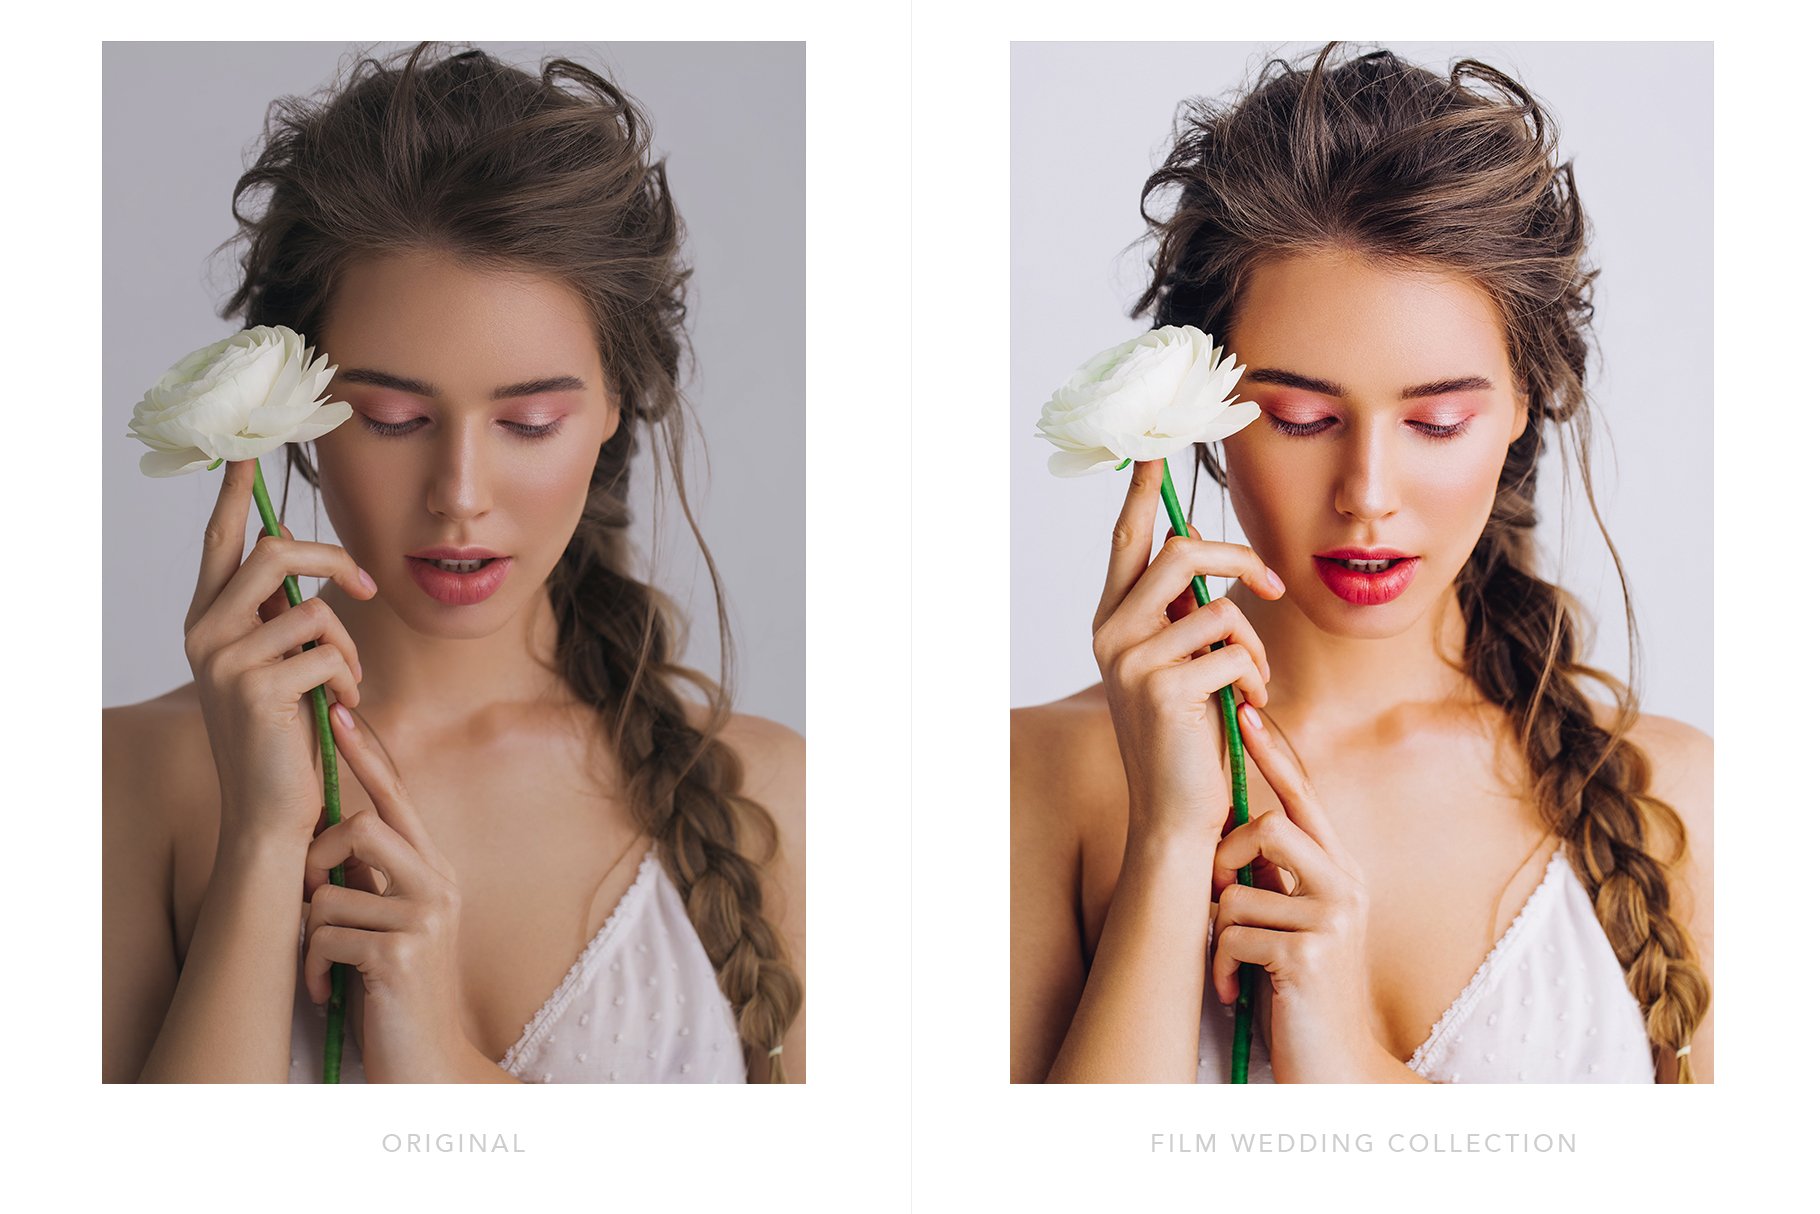 filmic-editing-presets-for-wedding-photography.jpg